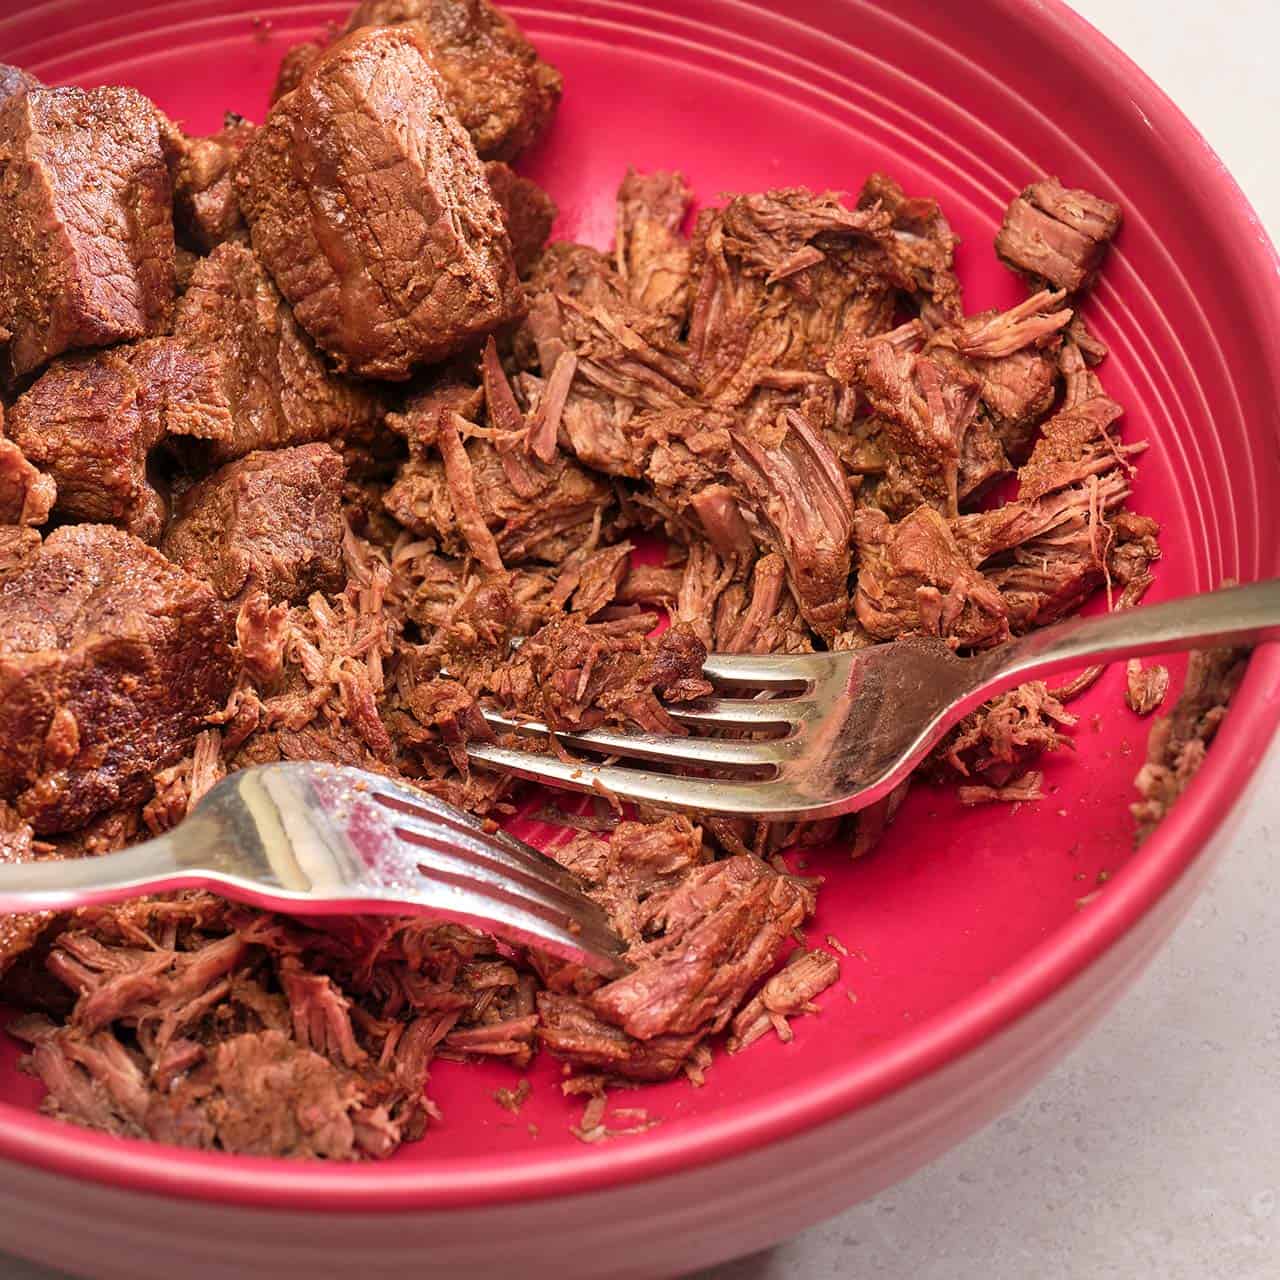 A bowl with cubes of beef, a pair of forks, and some shredded beef